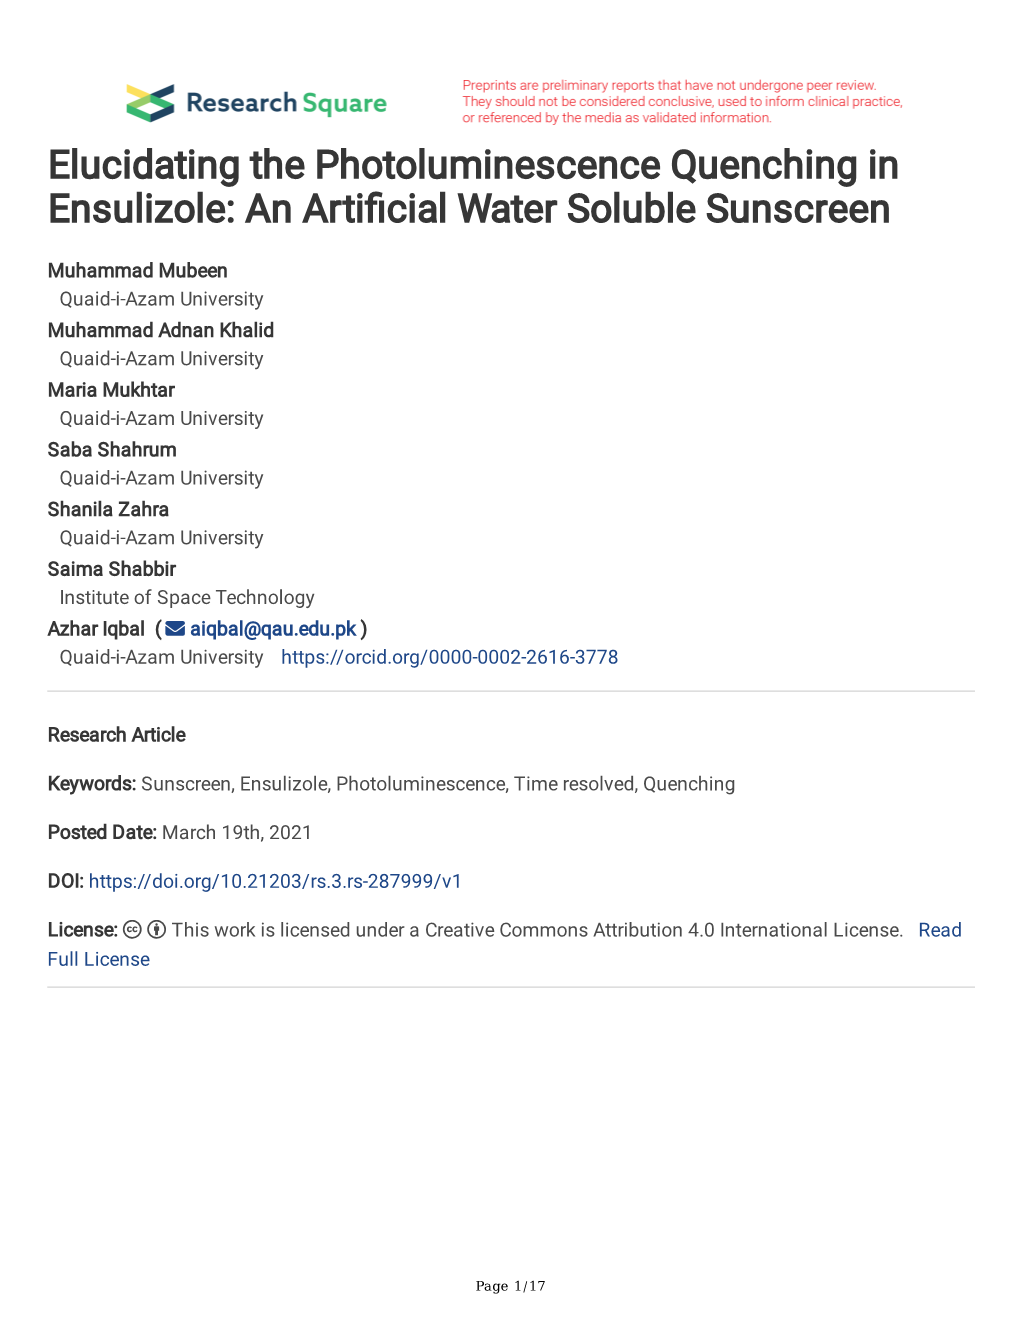 Elucidating the Photoluminescence Quenching in Ensulizole: an Artifcial Water Soluble Sunscreen